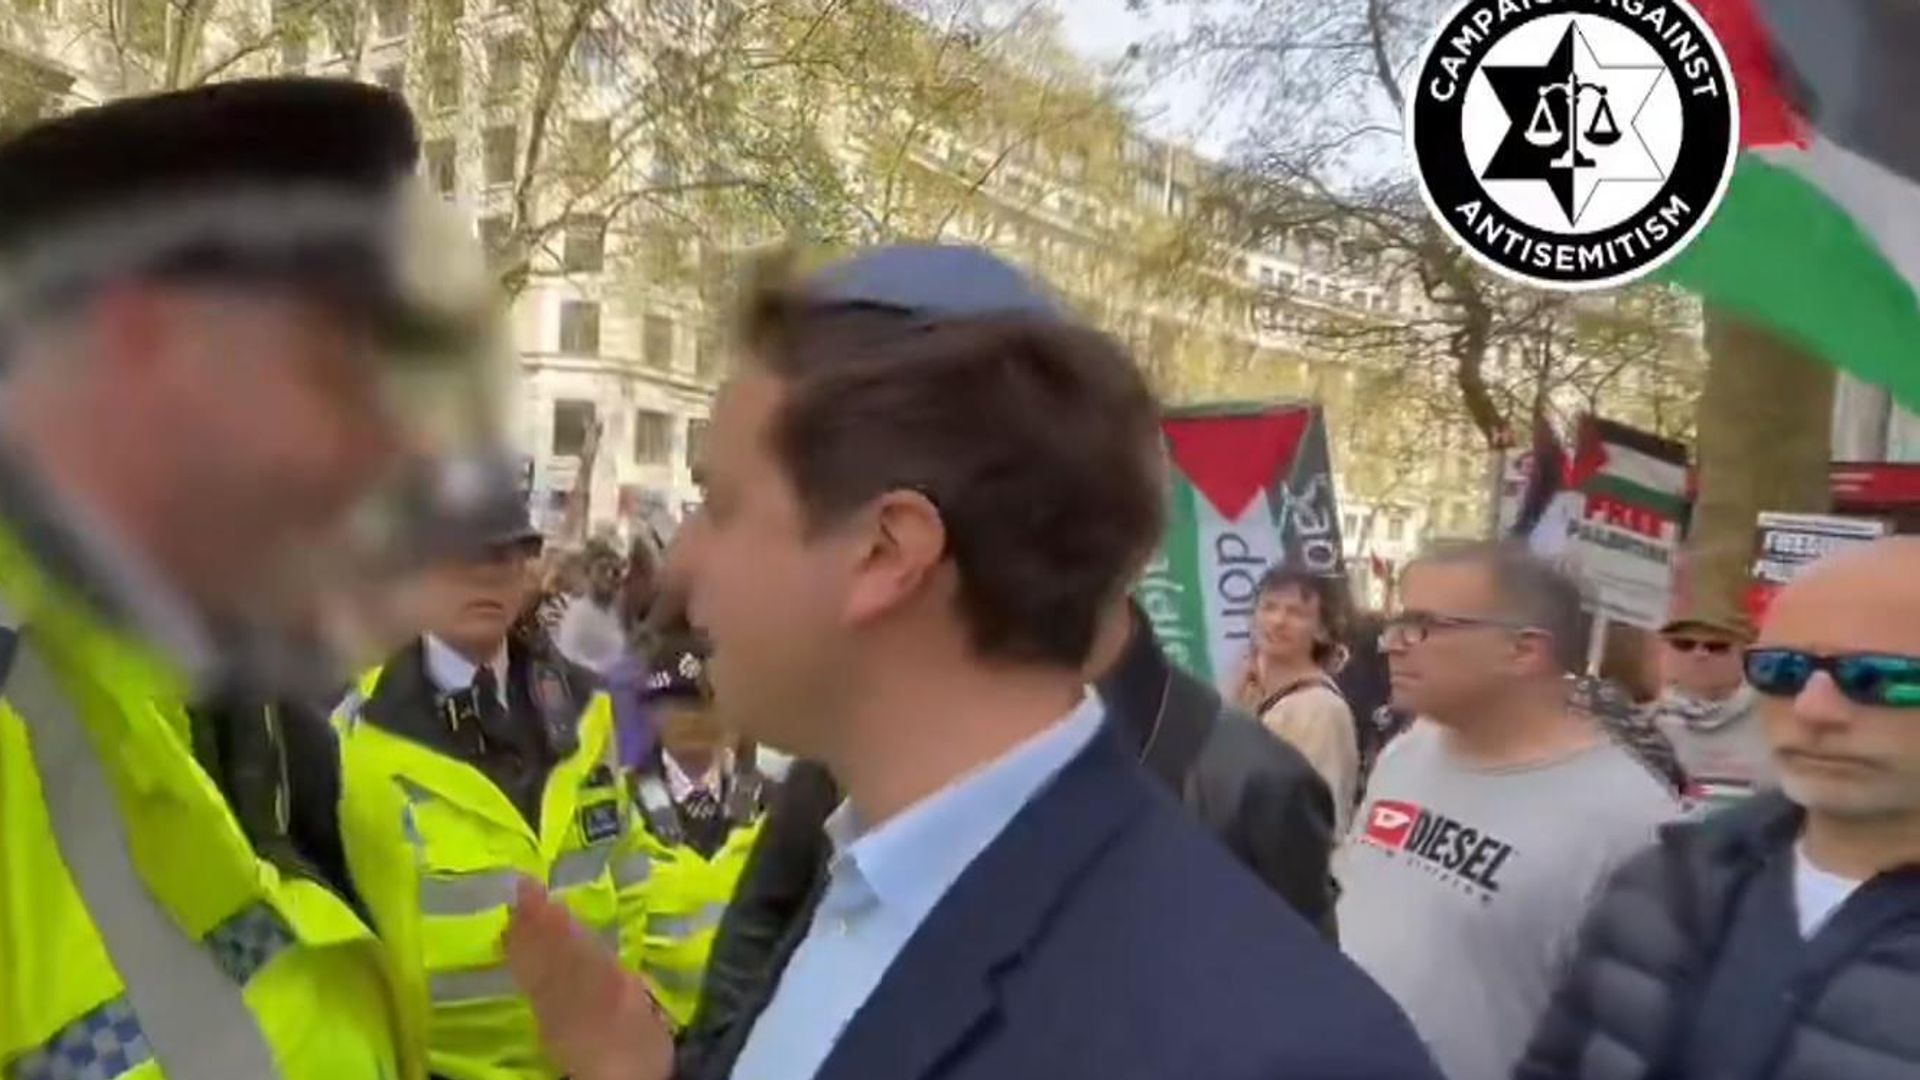 Antisemitism campaigner called 'openly Jewish' by officer and threatened with arrest calls for Met chief to resign